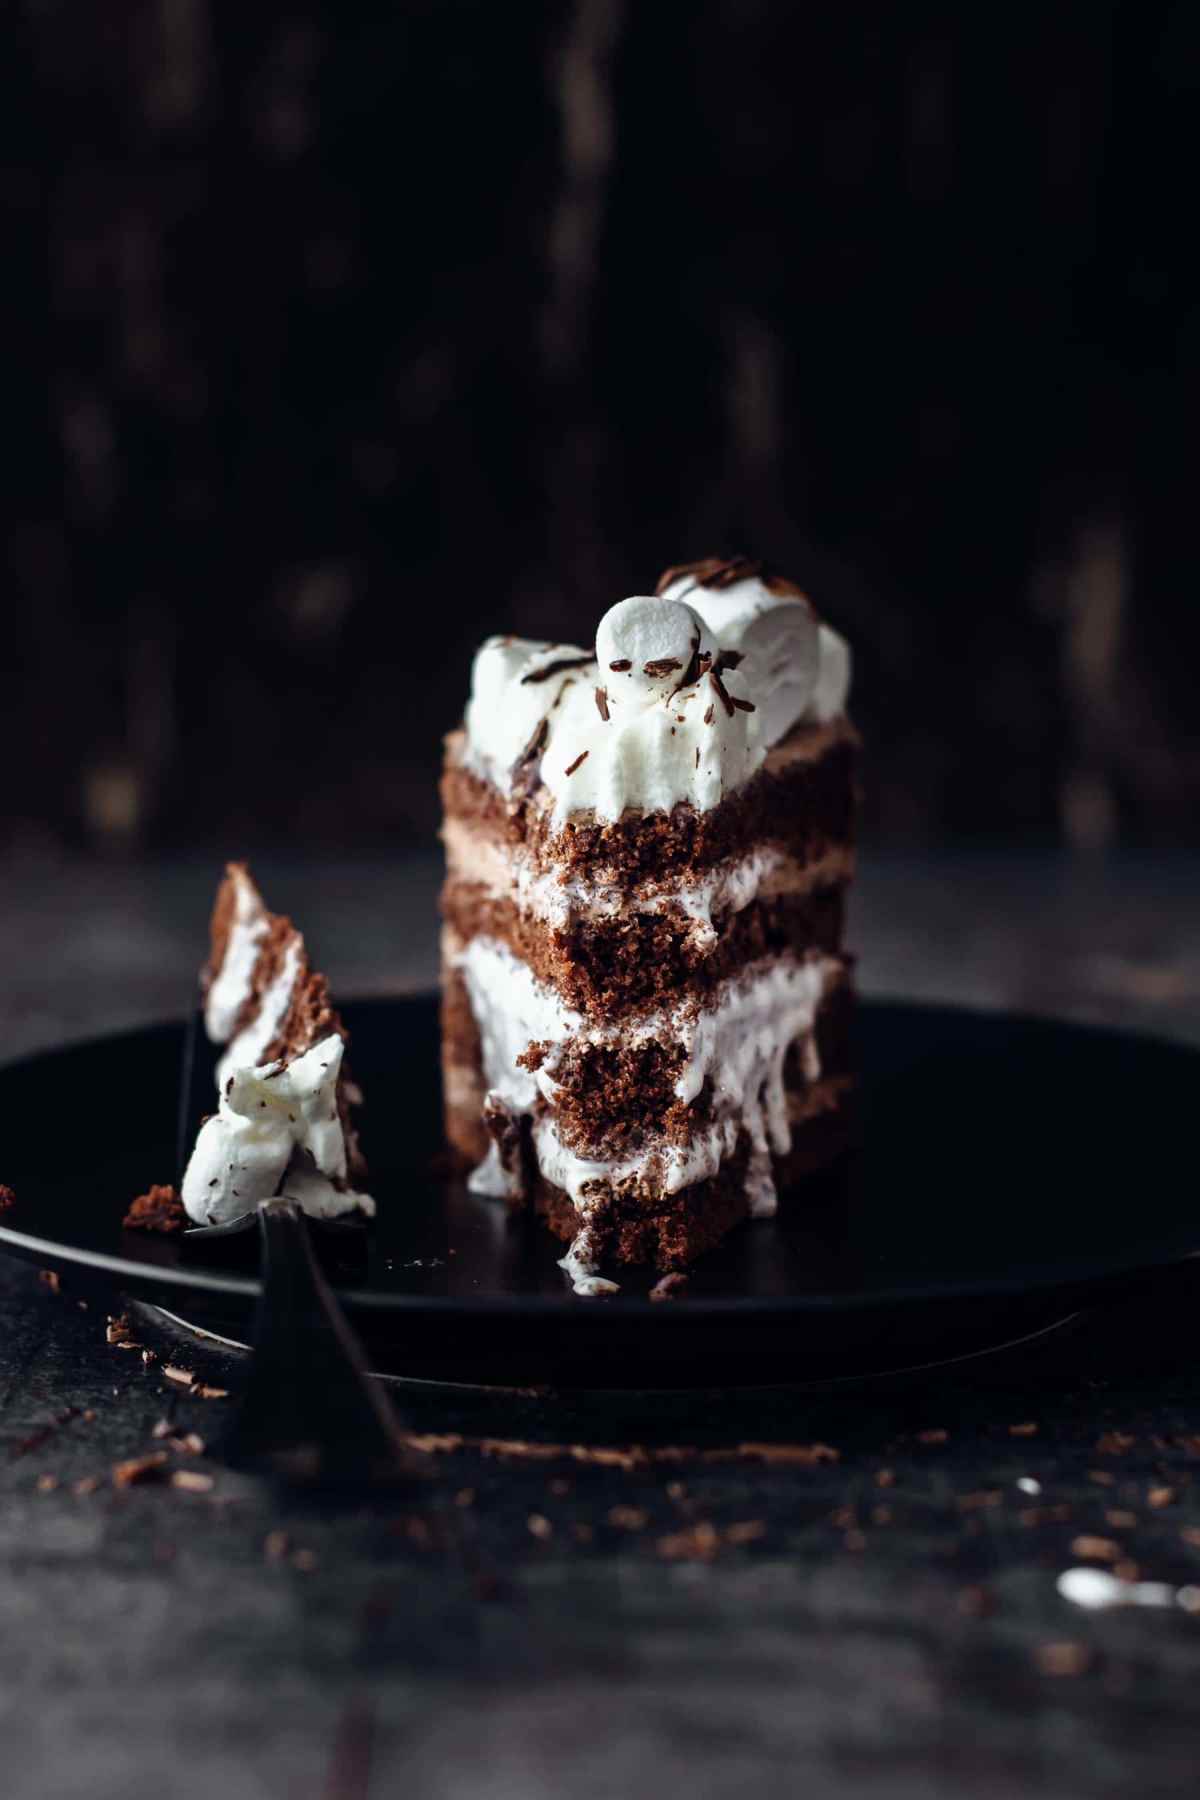 sliced chocolate layer cake filled with oozing marshmallow fluff and topped with marshmallow